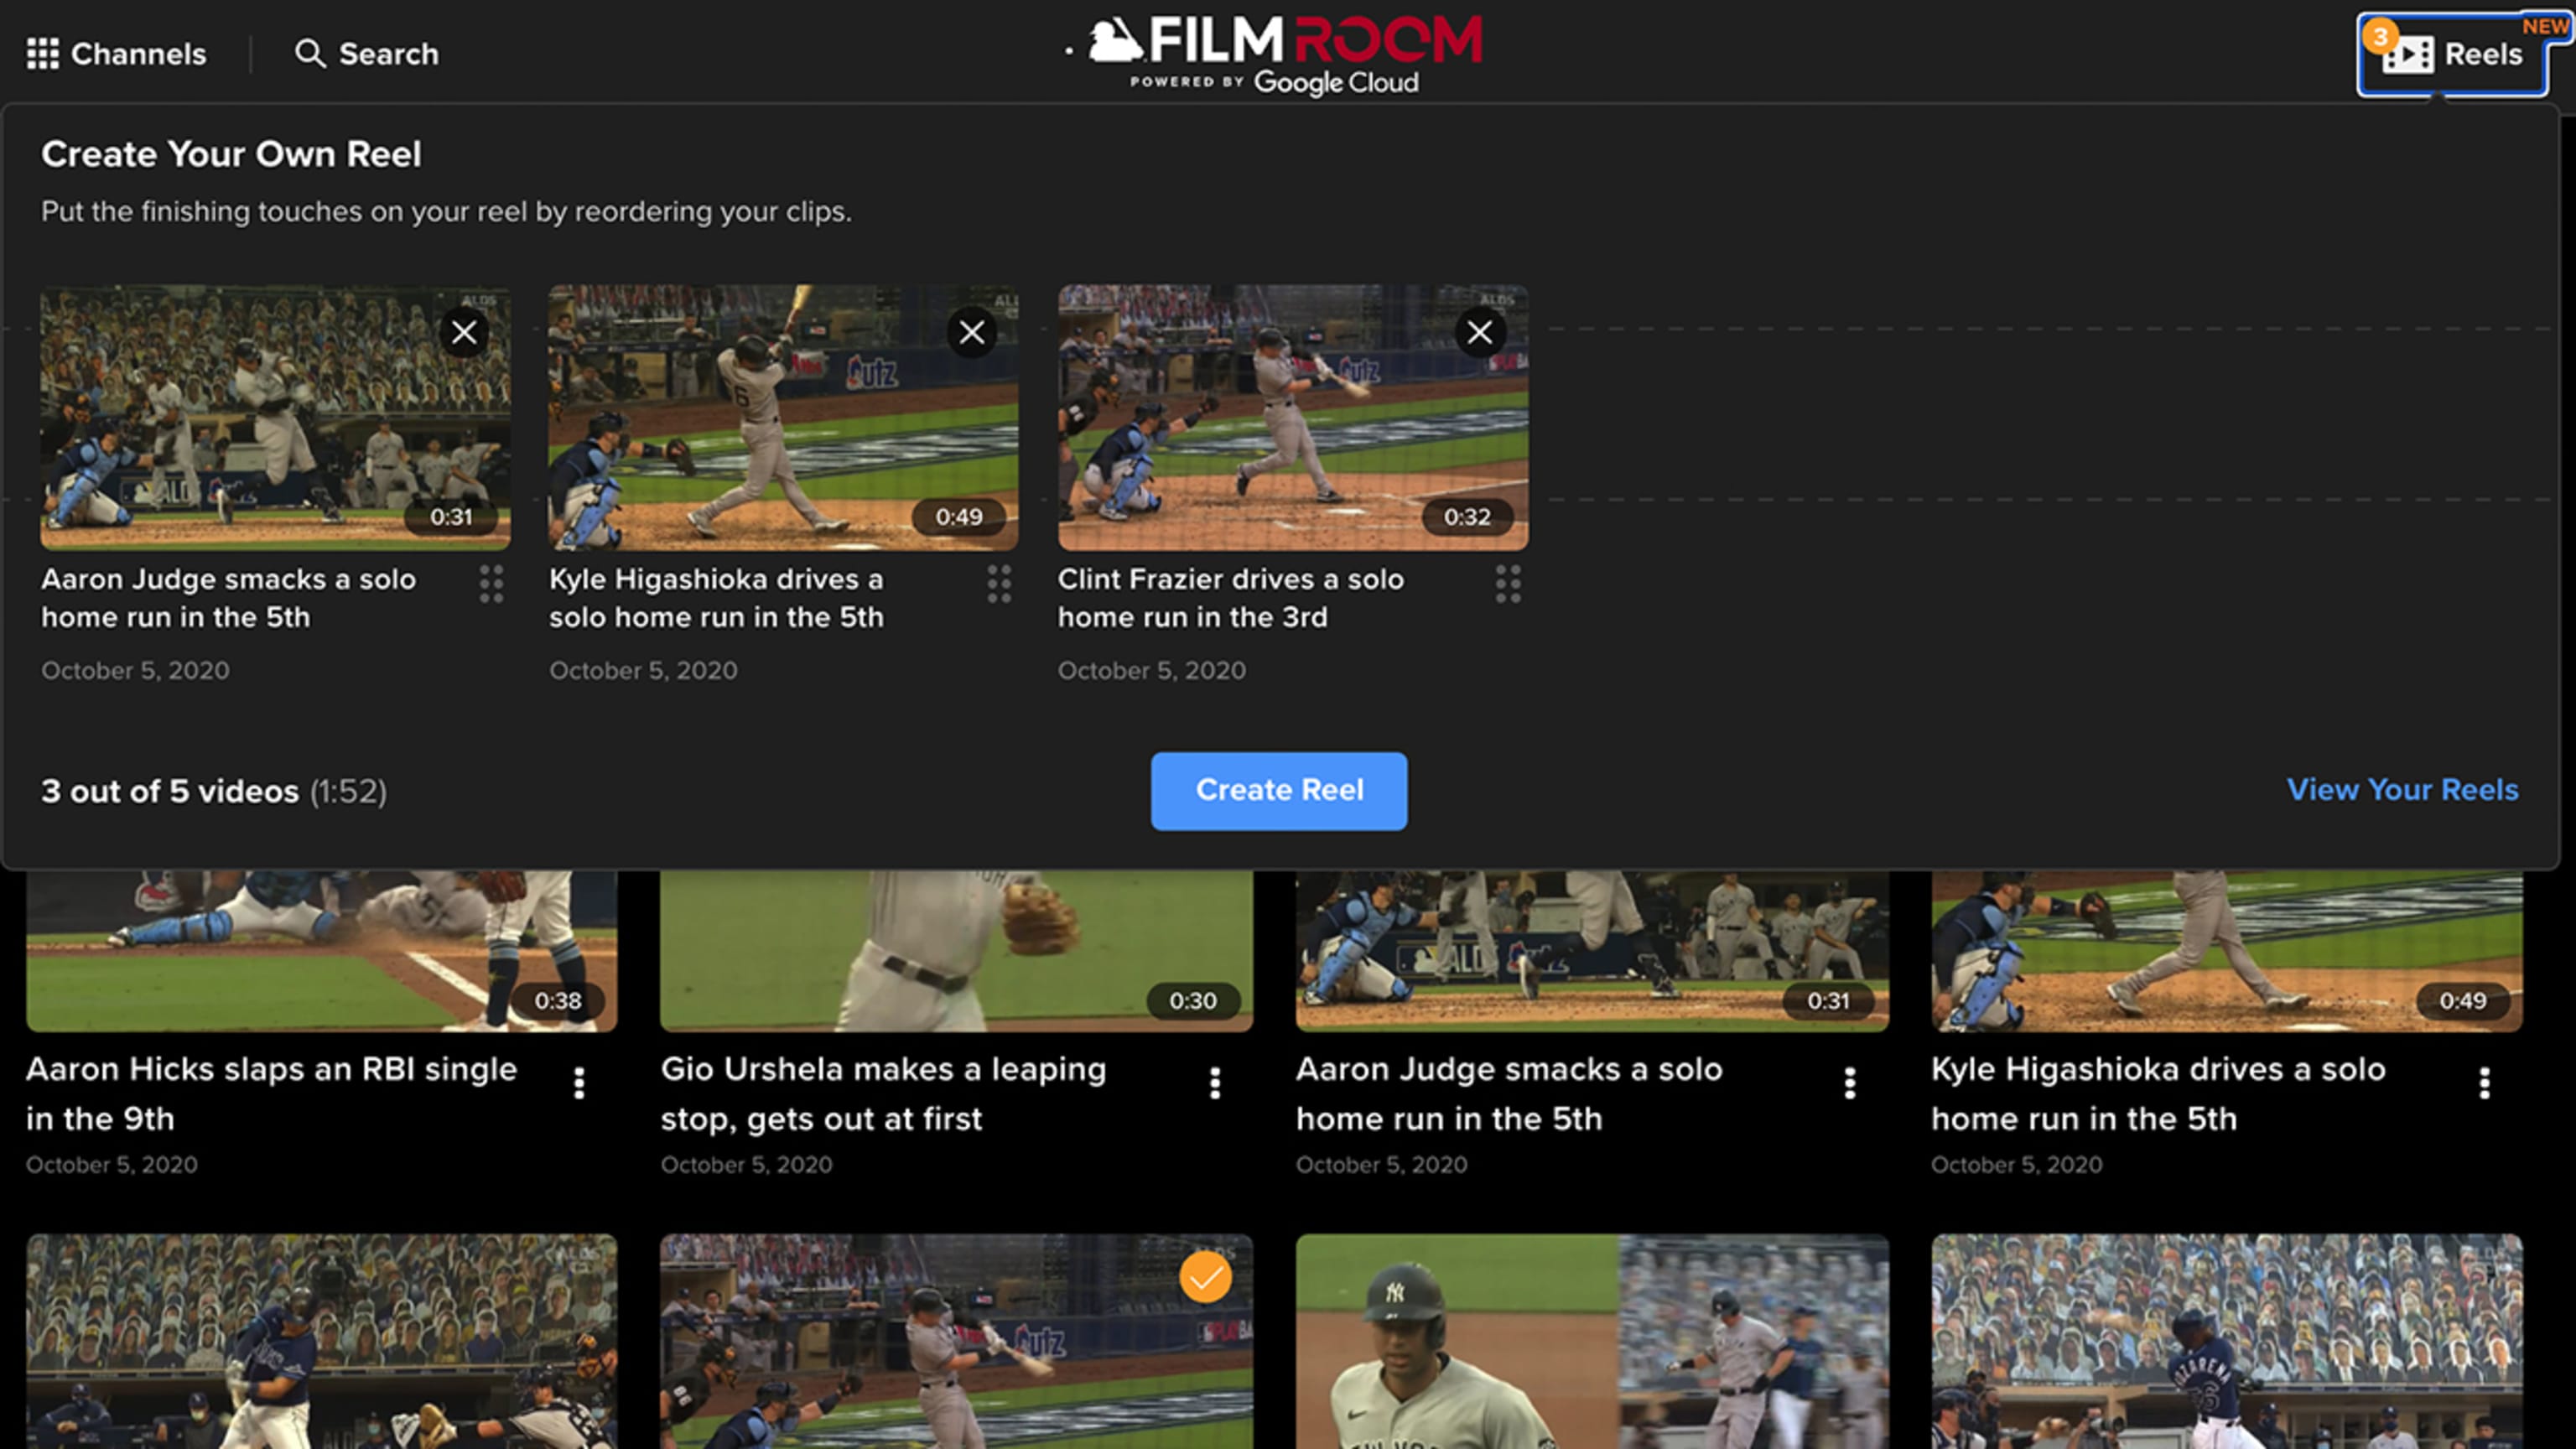 In-Game Video Returns to Baseball, With Some Changes - The New